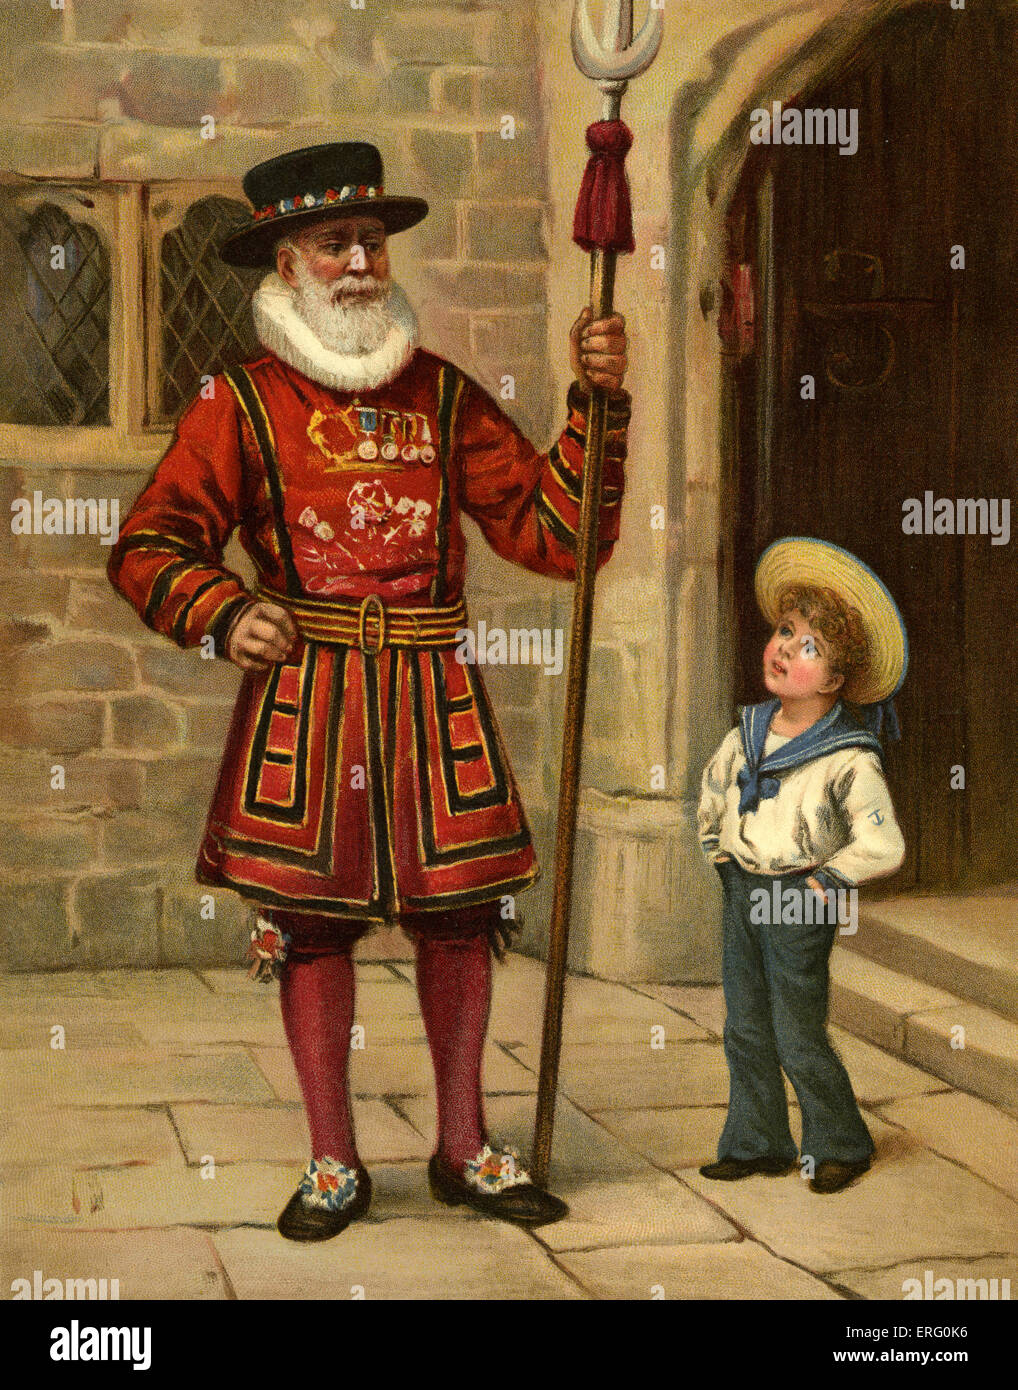 Yeoman of the Guard or Beefeater /Yeoman Warder. They are ceremonial guards of the Tower of London.  Edwardian illustration. Stock Photo